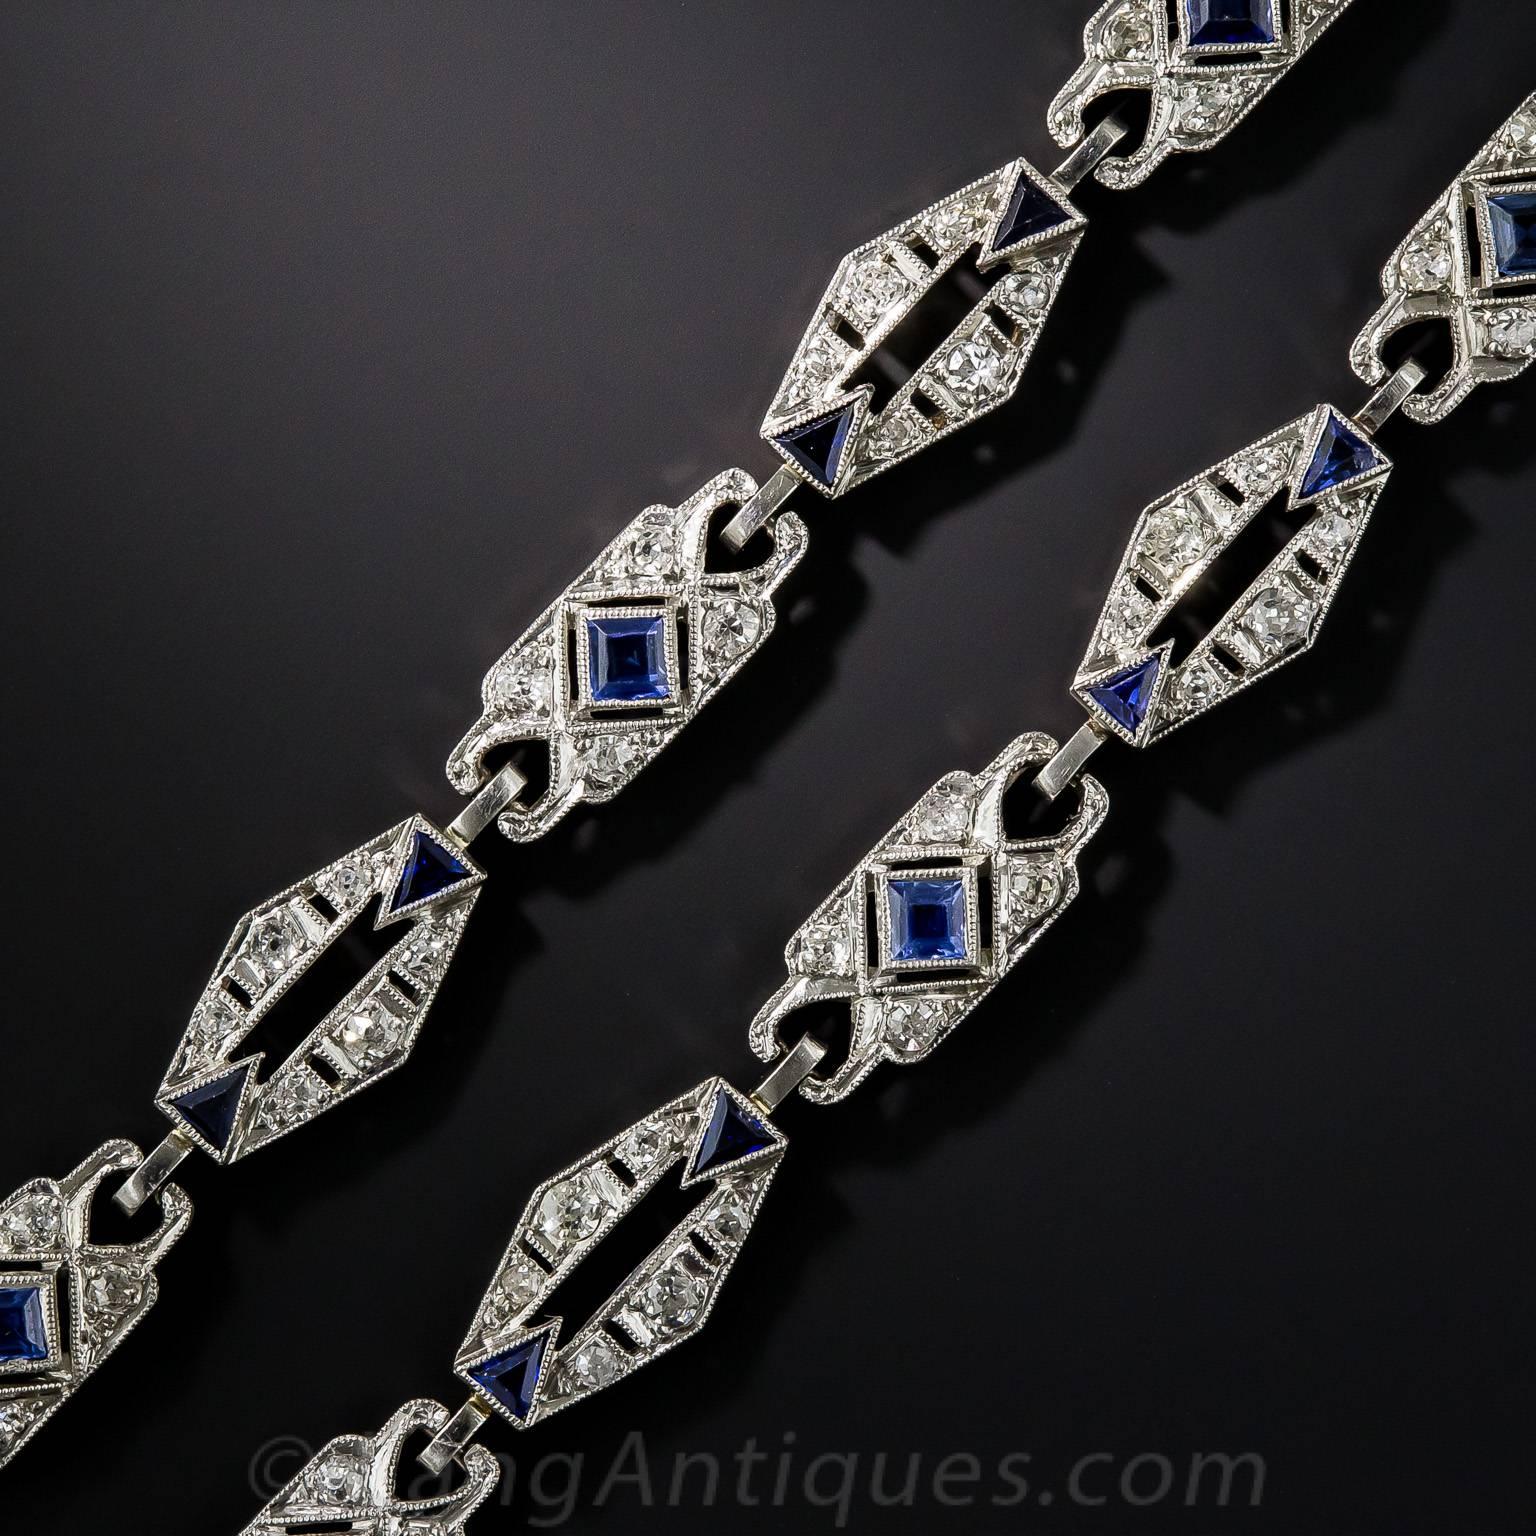 Stunning and versatile, three-in-one, original Art Deco jewels, dating back to the roaring, wild and stylish 1920s, may be worn together as a 15-inch-long choker necklace or separately as bracelets. The characteristic geometric platinum links